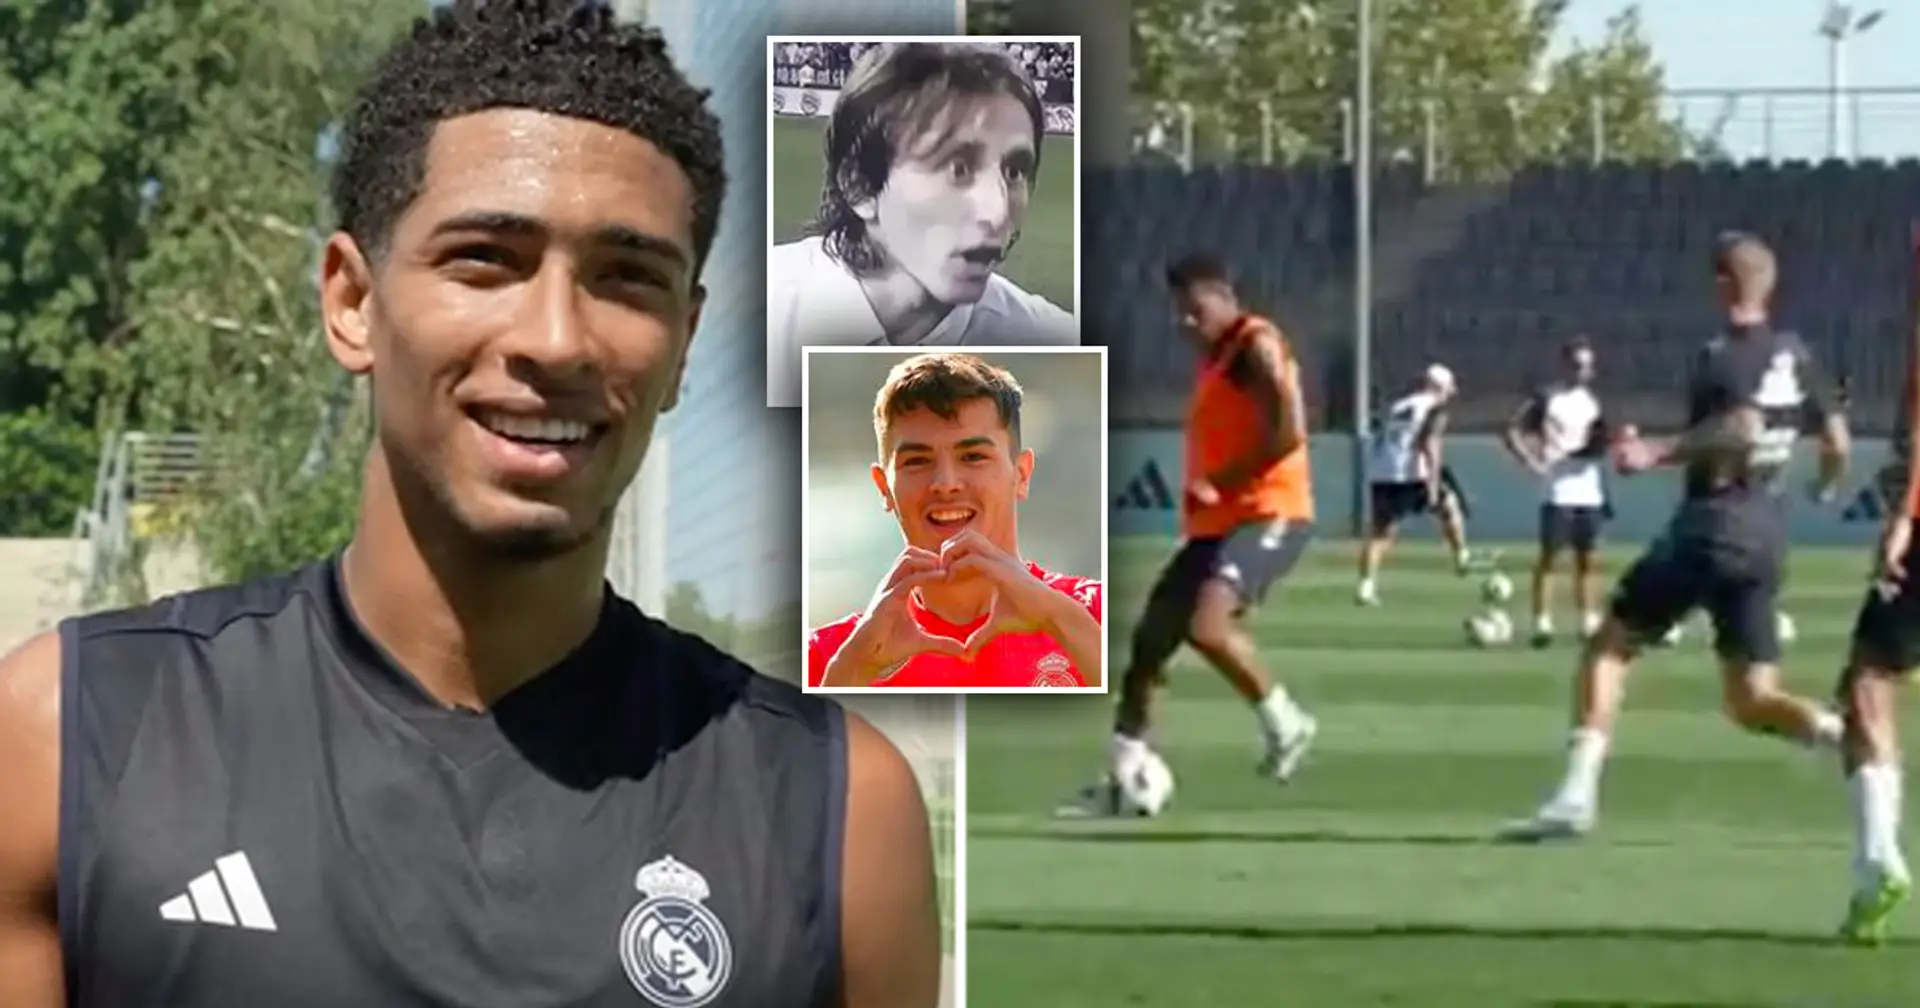 Bellingham assists Brahim with classic Luka Modric move in training